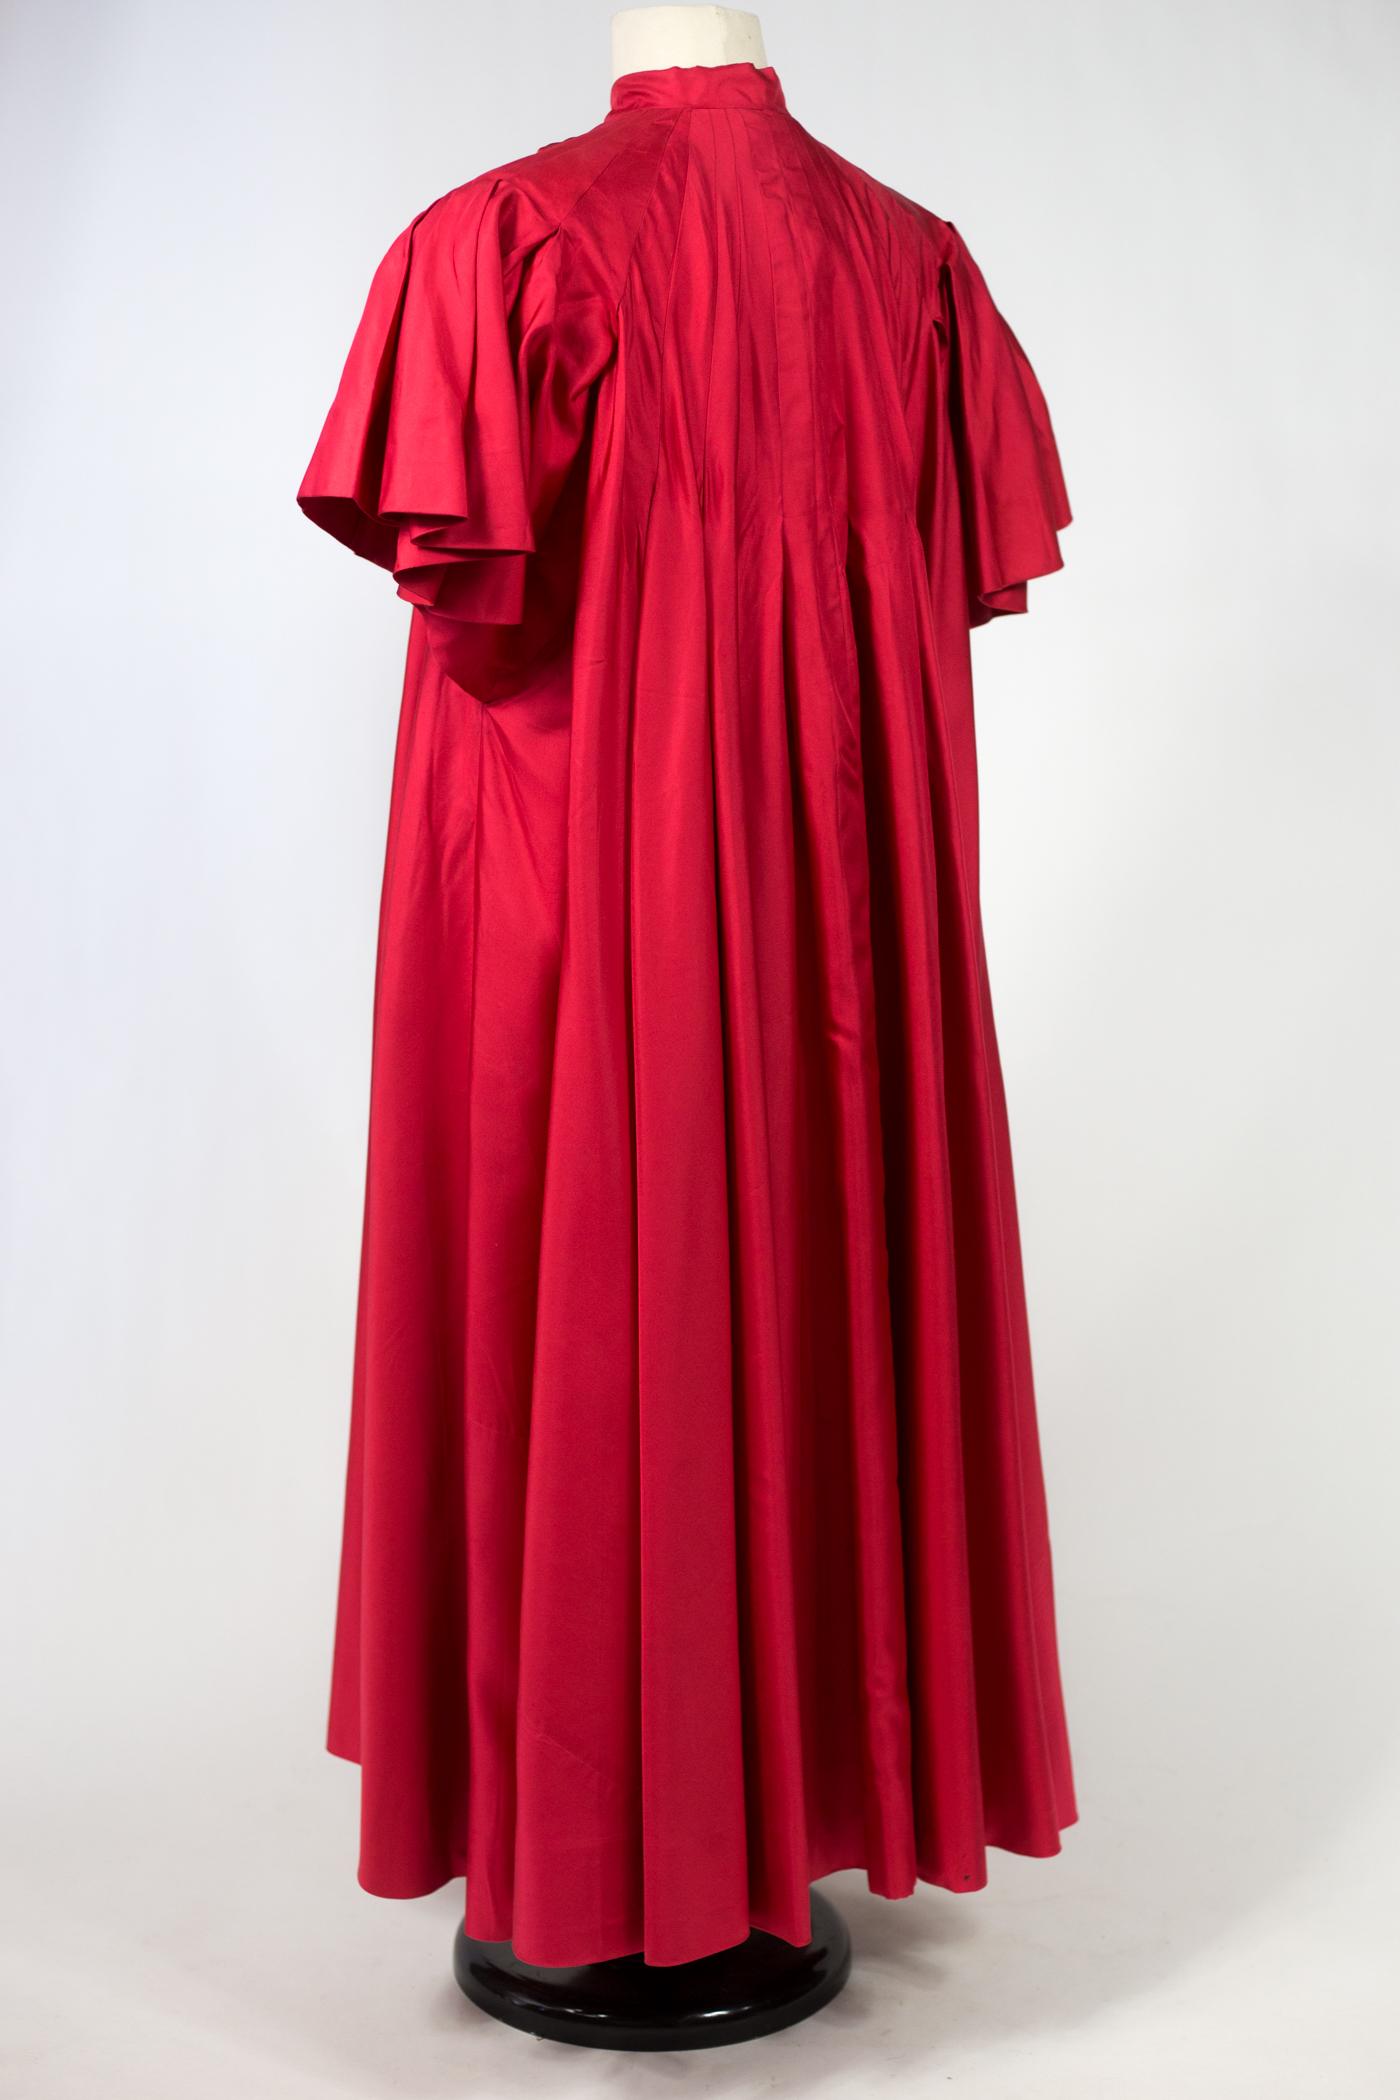 Women's An Evening Maggy Rouff French Haute Couture Red Silk Coat Circa 1955